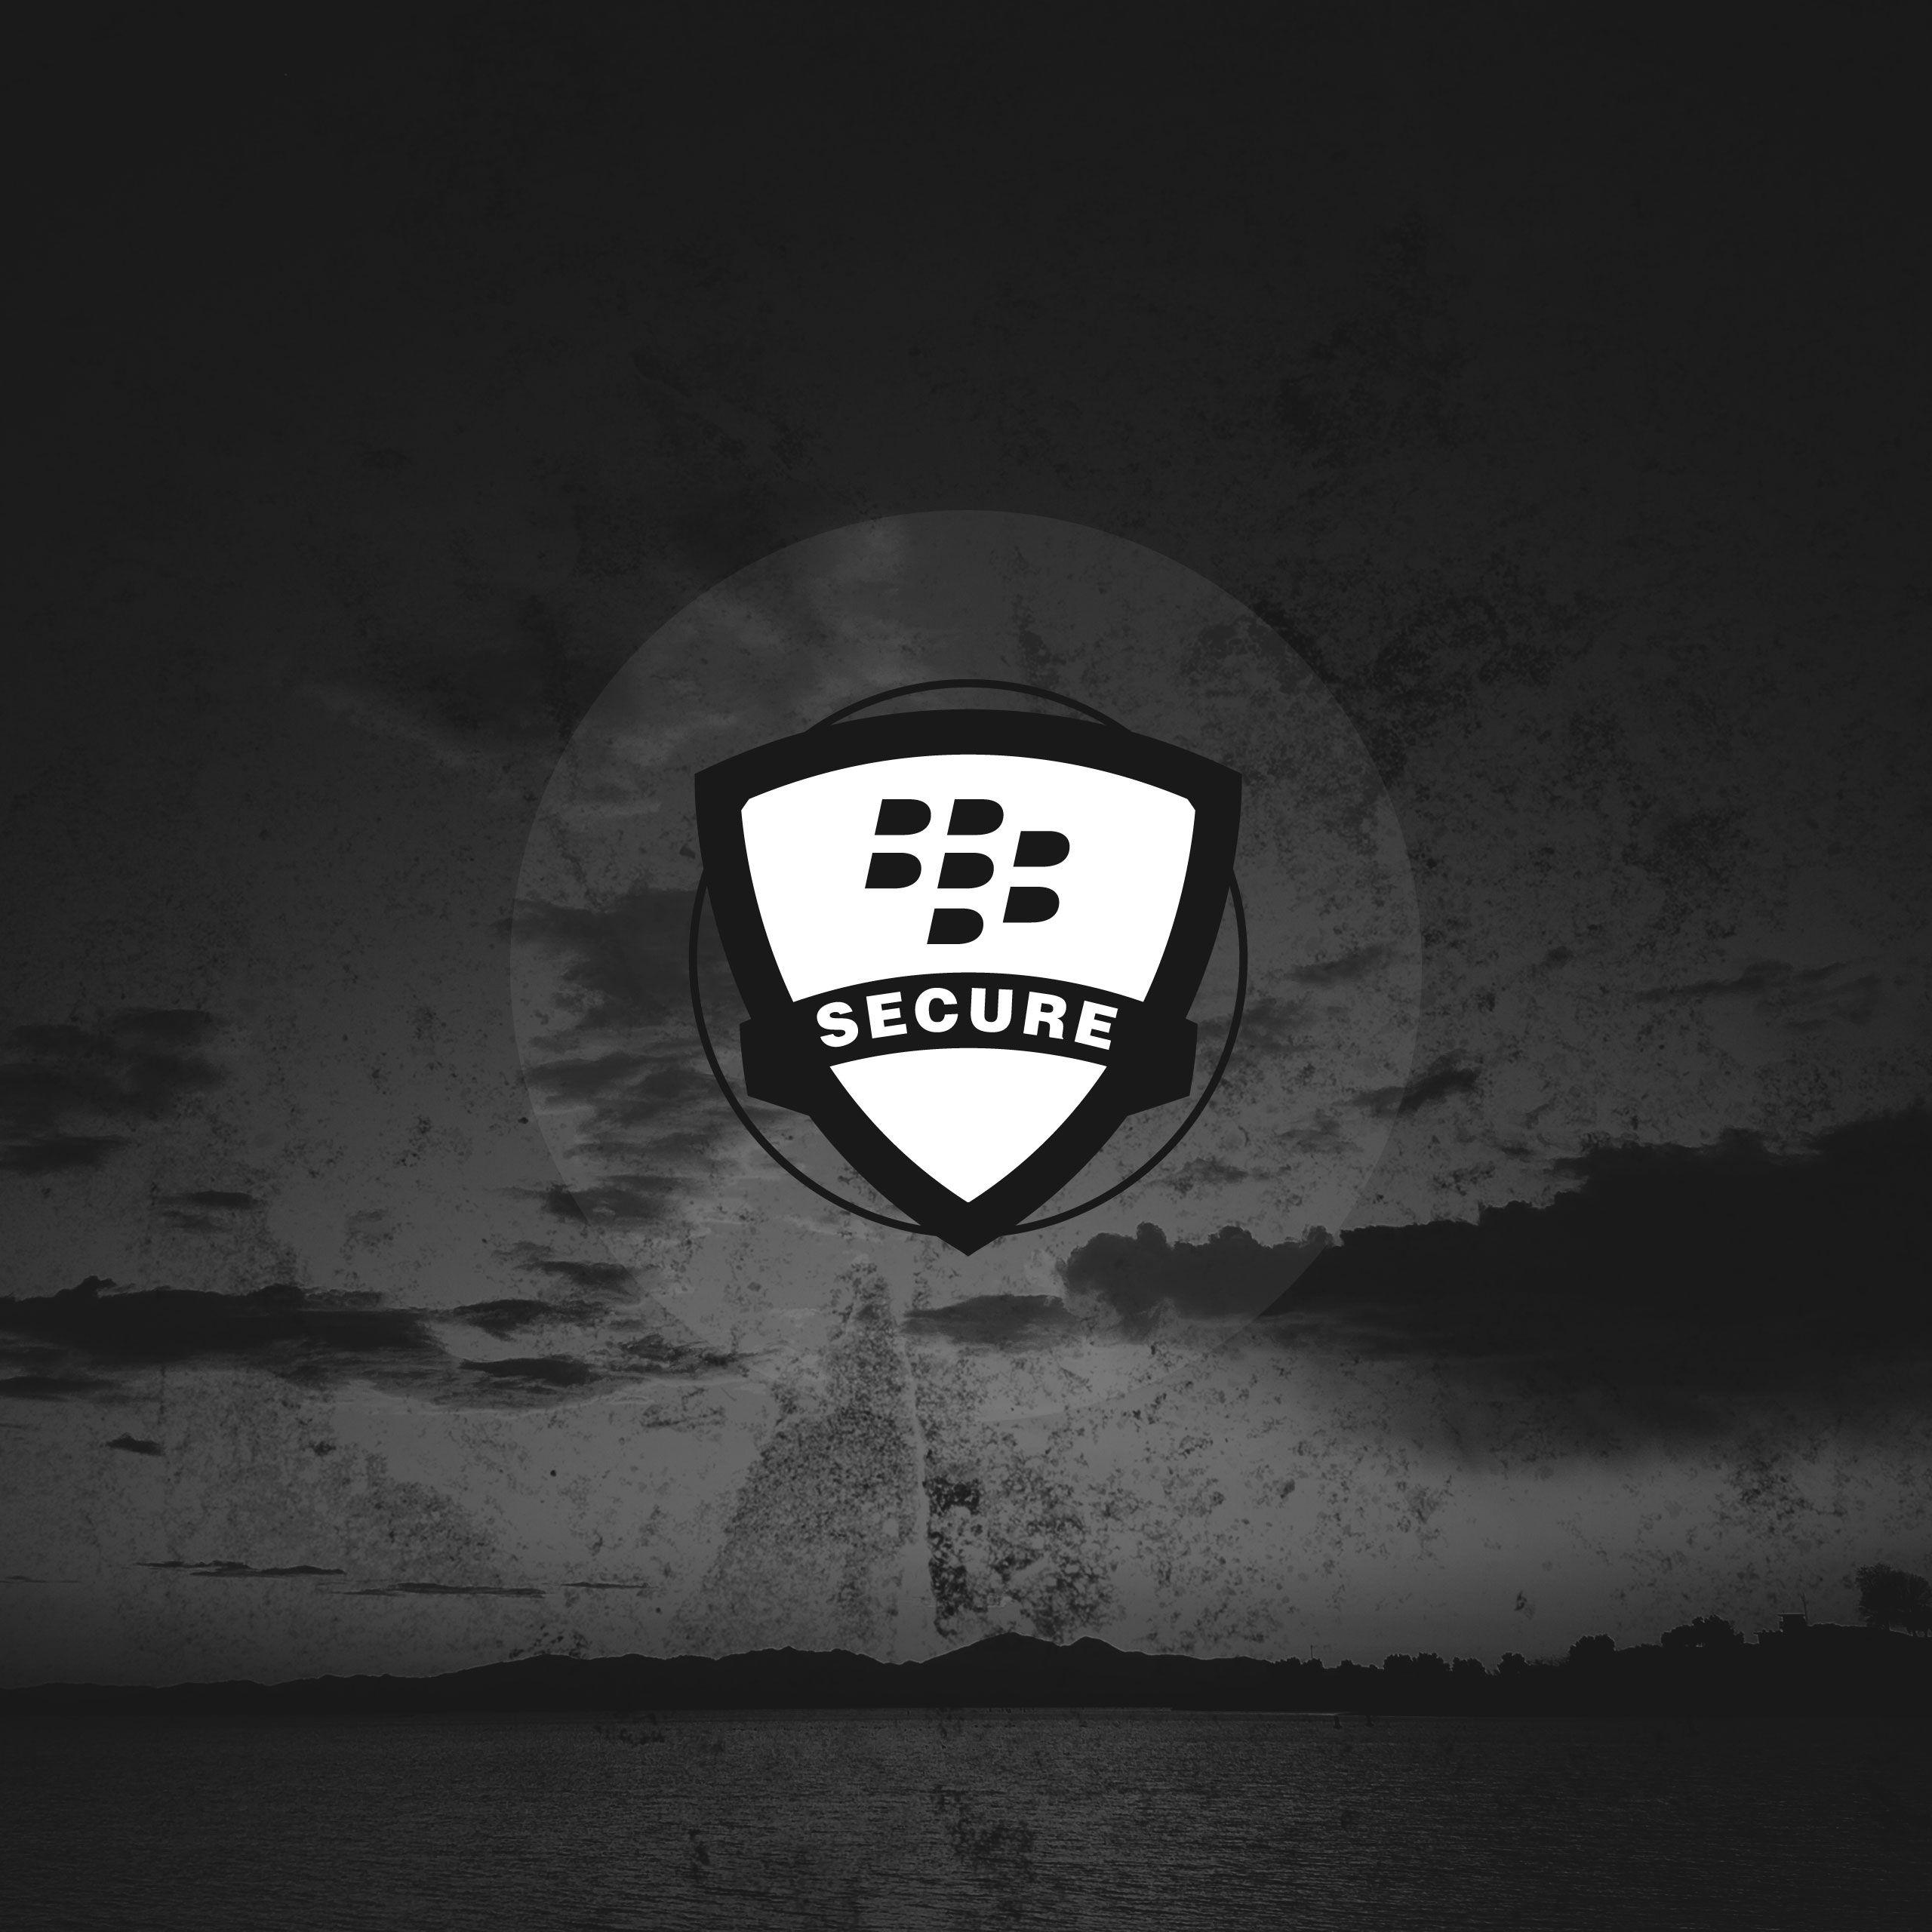 Download this free BlackBerry Secure wallpaper!